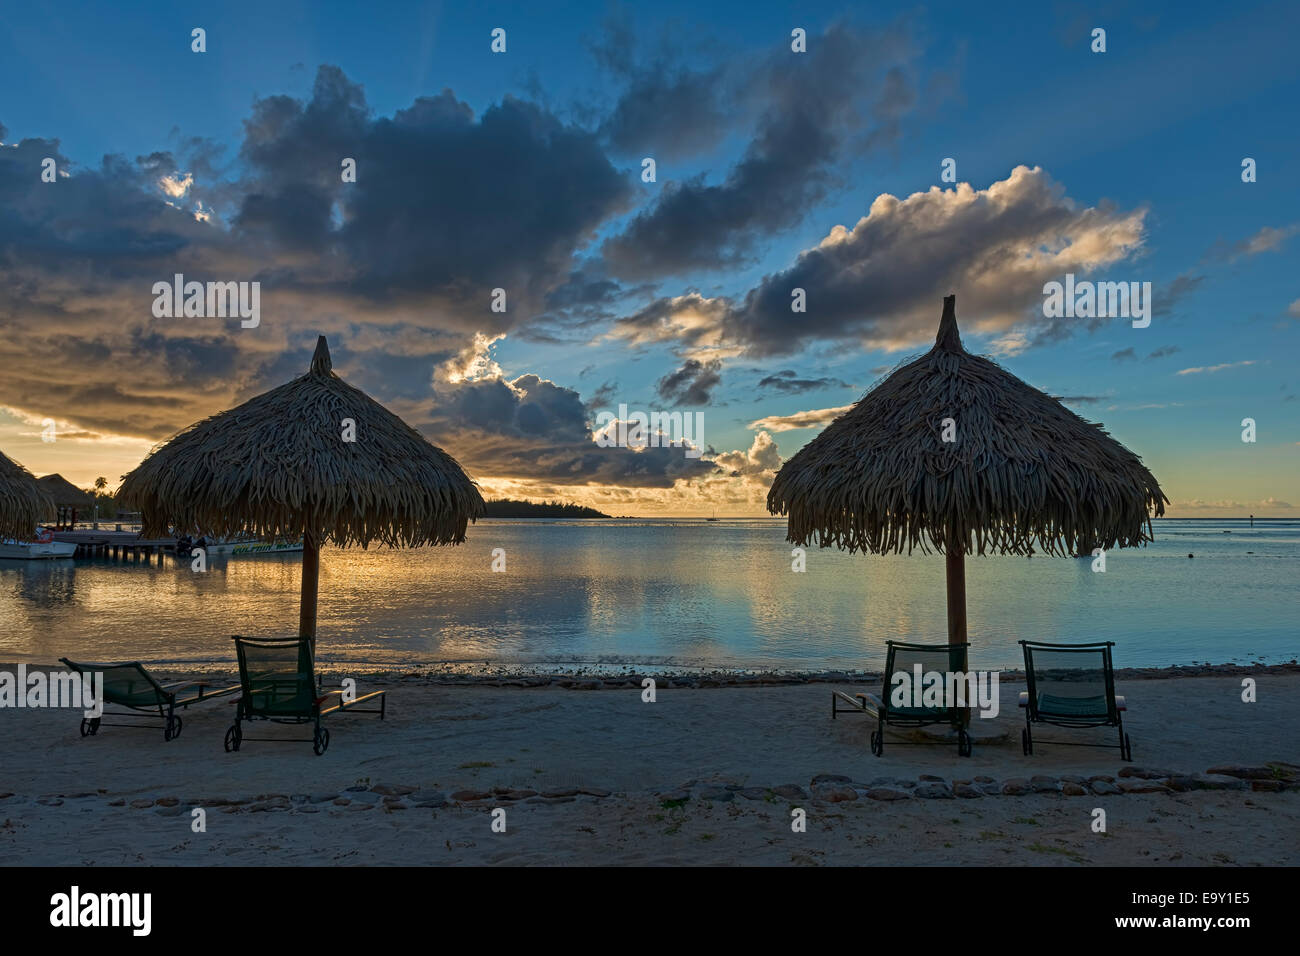 Parasols and sun loungers on the beach, evening atmosphere, Moorea, French Polynesia Stock Photo